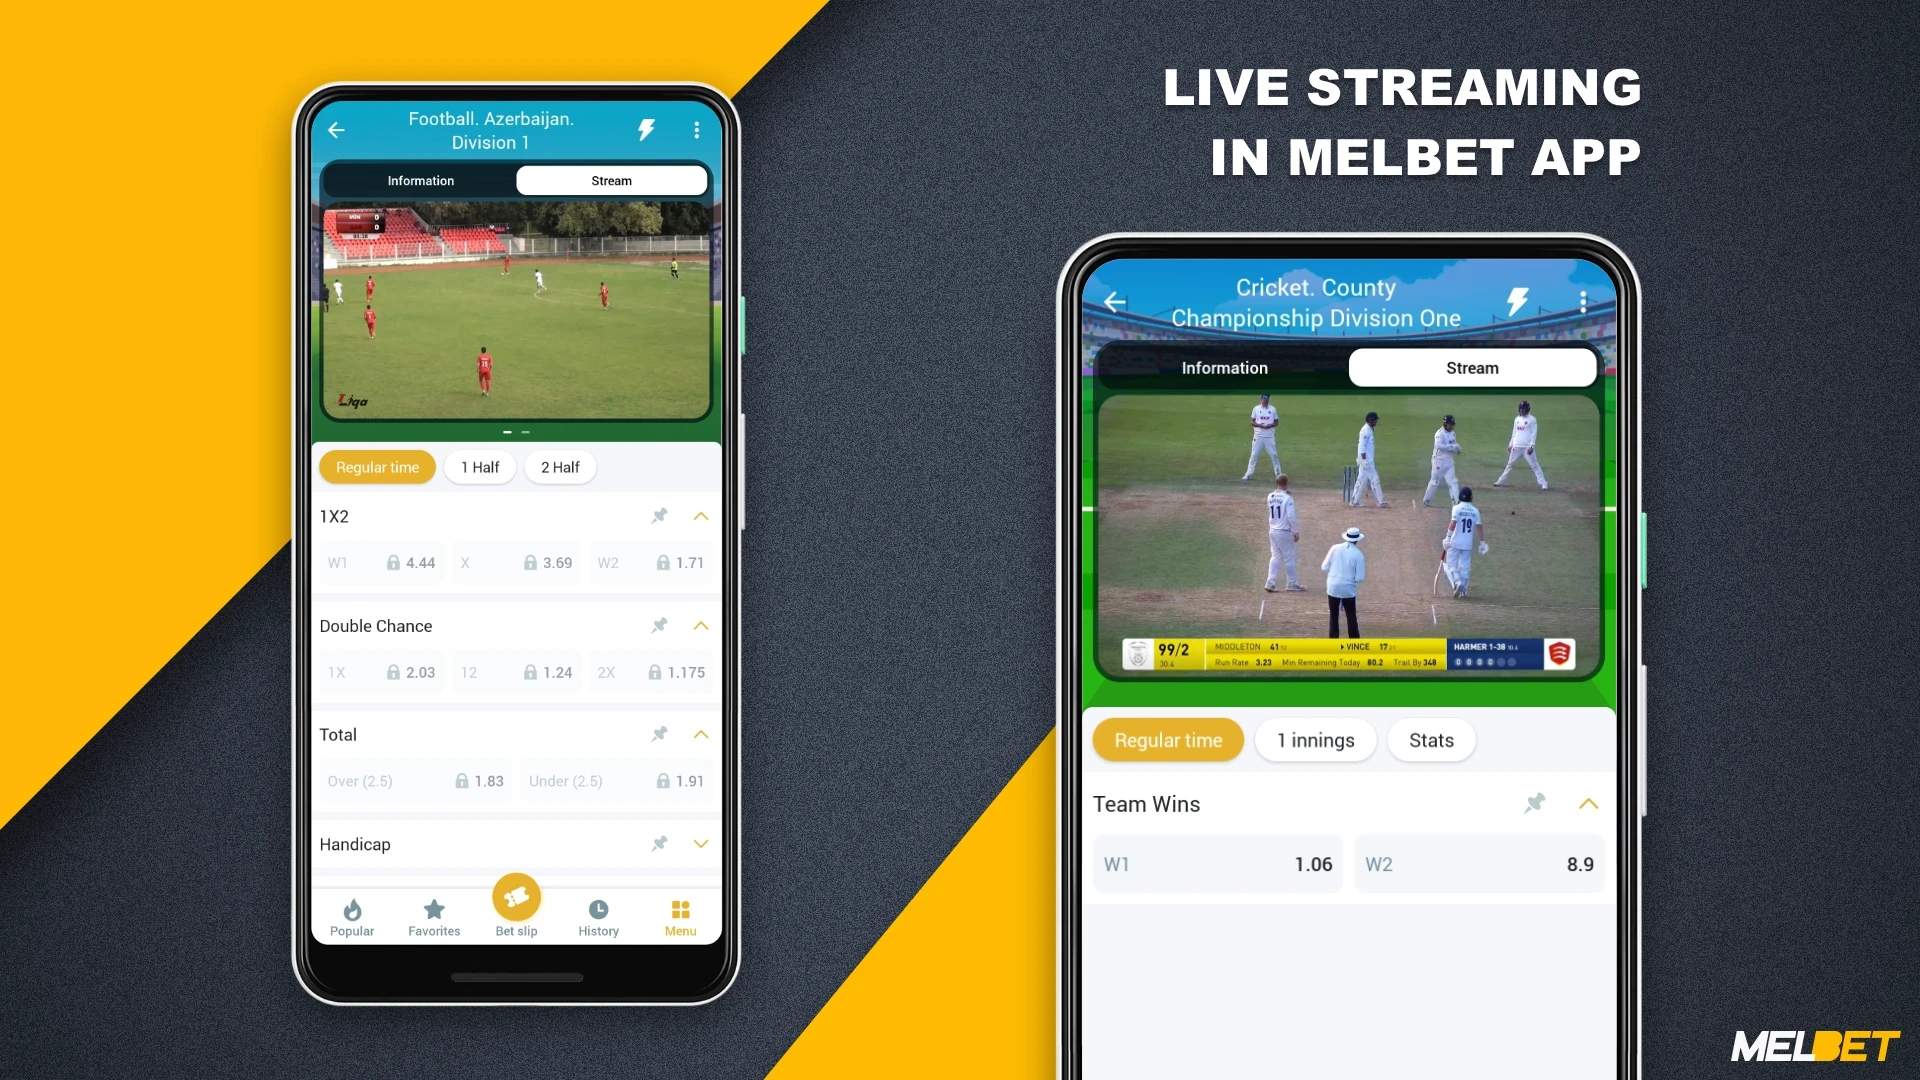 In the Melbet app, registered users can watch live match streaming